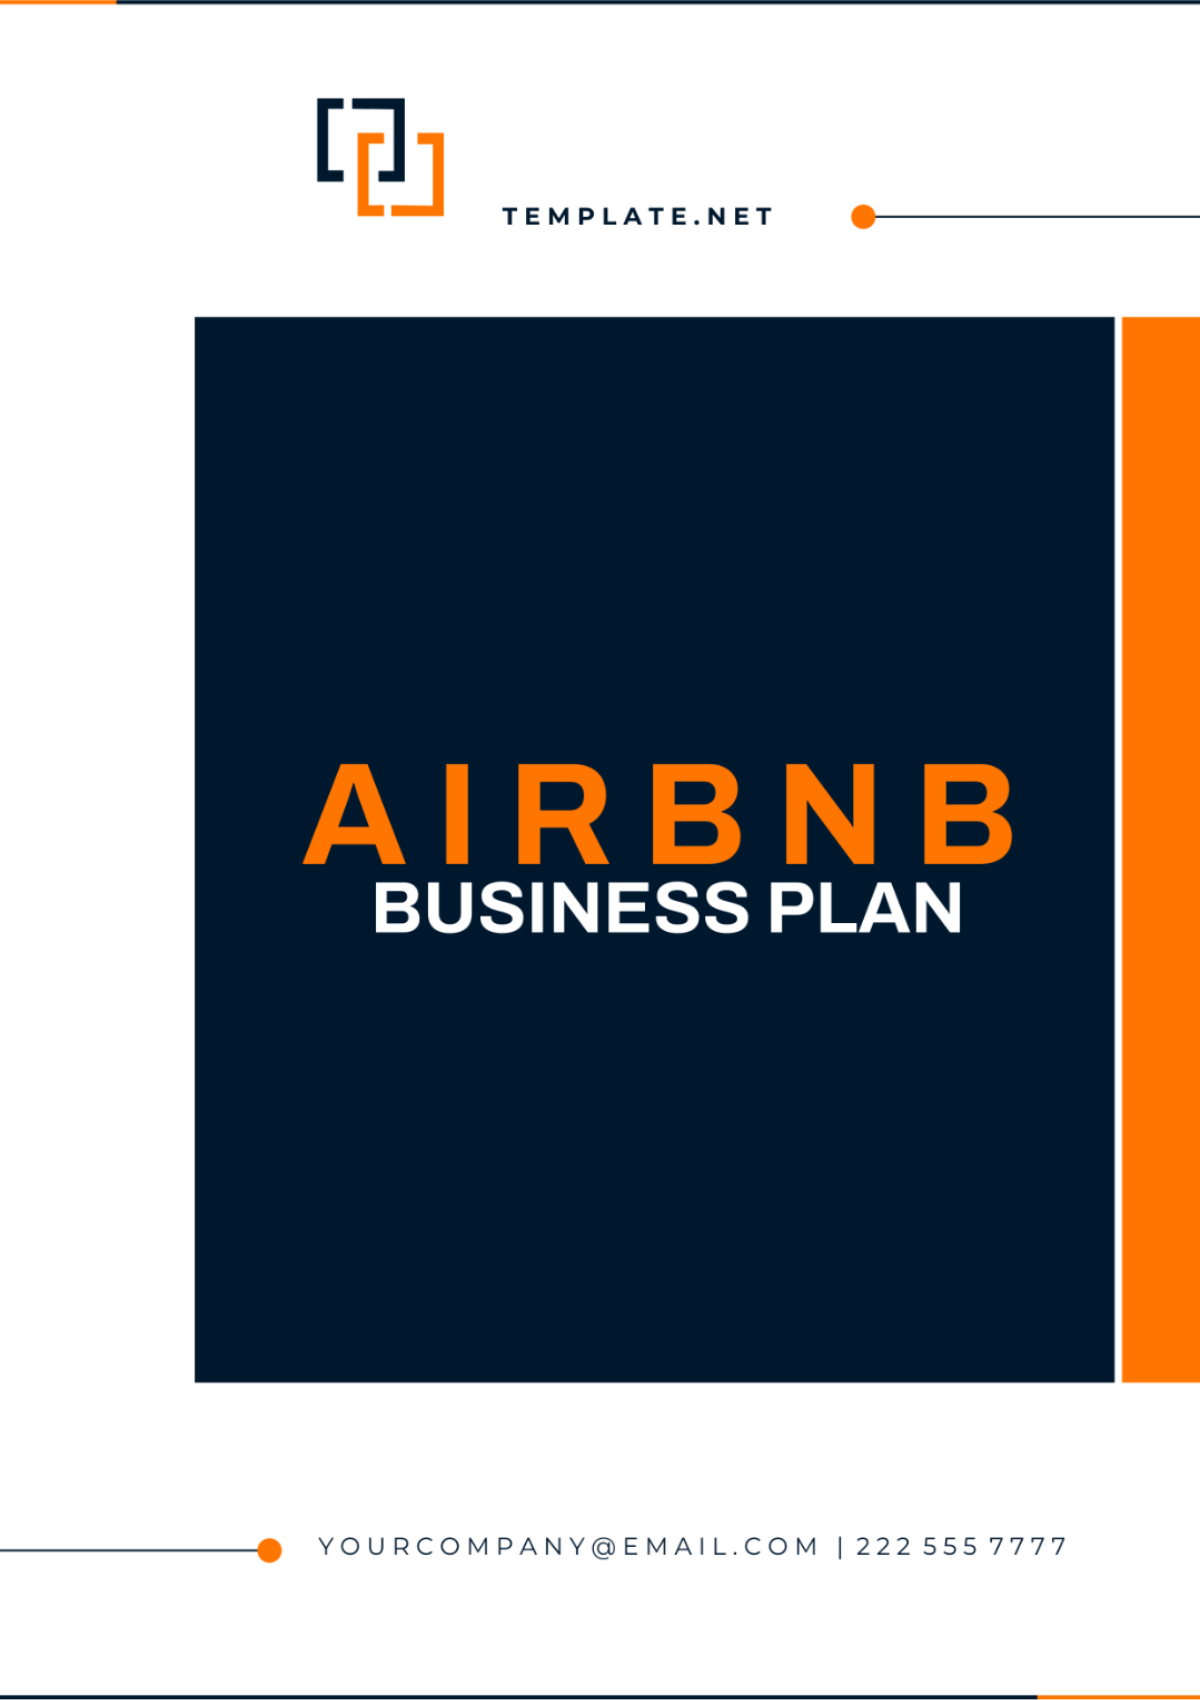 Airbnb Business Plan Template